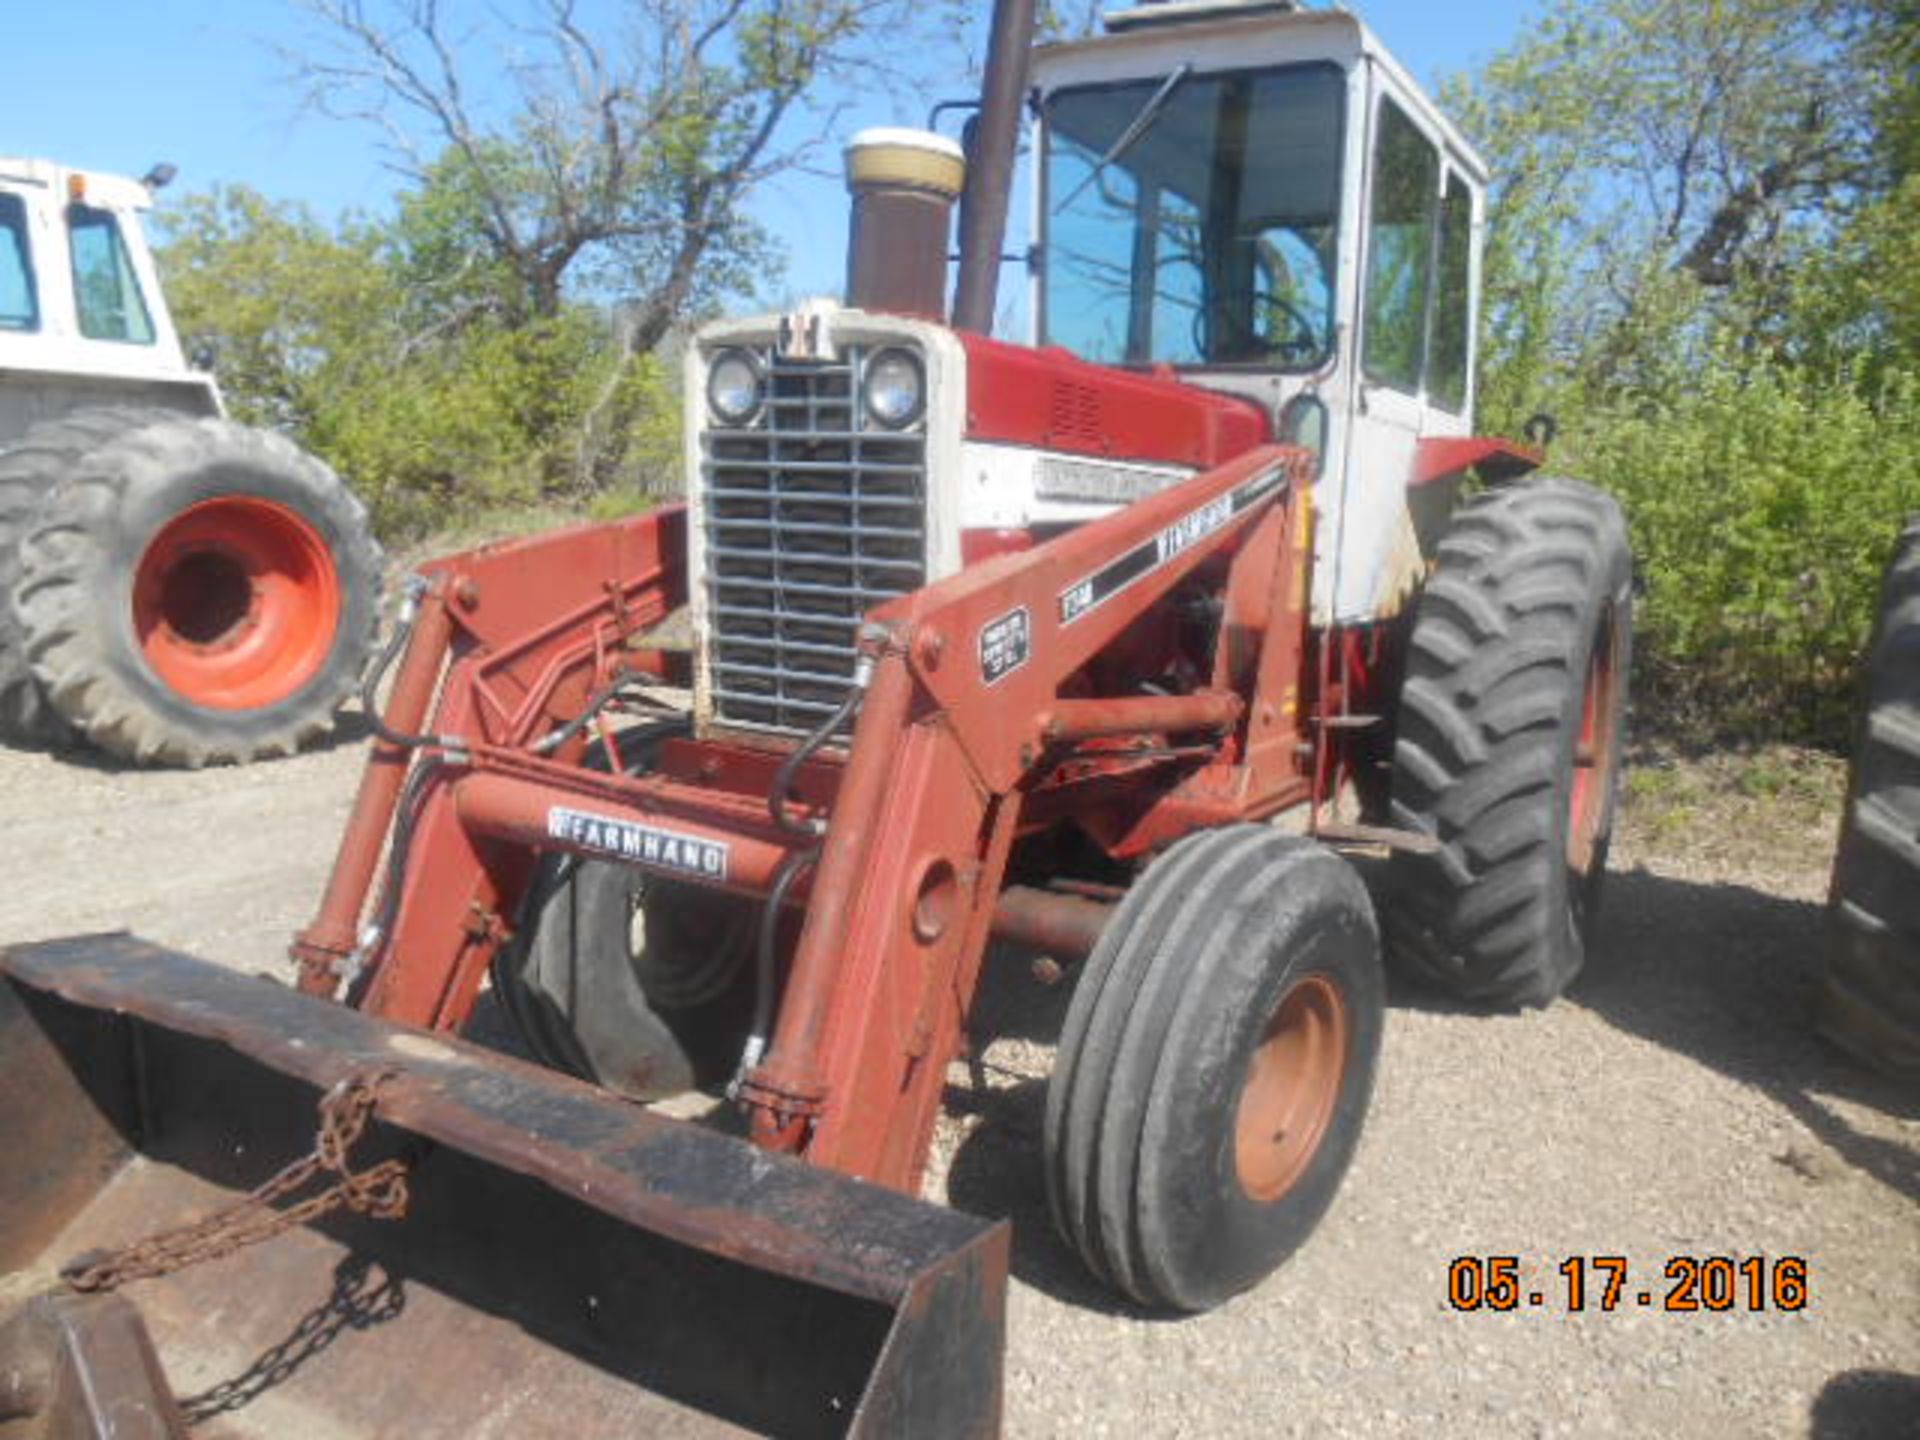 IHC 1256 Tractor (1206 motor) cab, Farmhand F348 loader - Power steering issues??